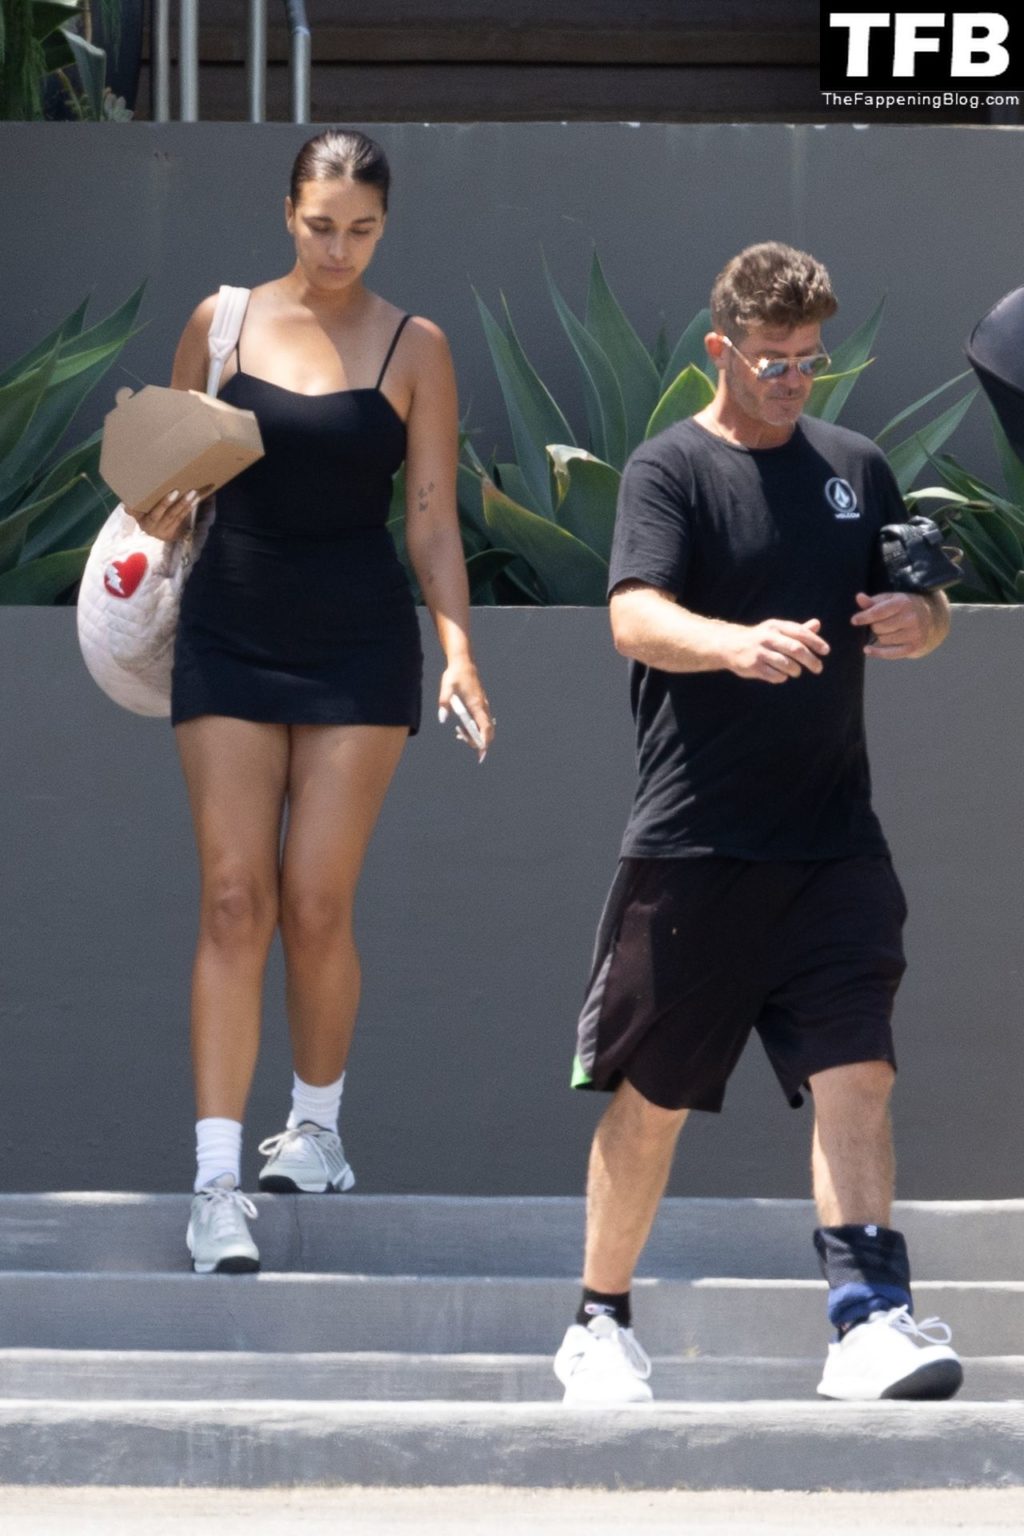 April Love Geary &amp; Robin Thicke are a Happy Couple That Plays Tennis Together (34 Photos)